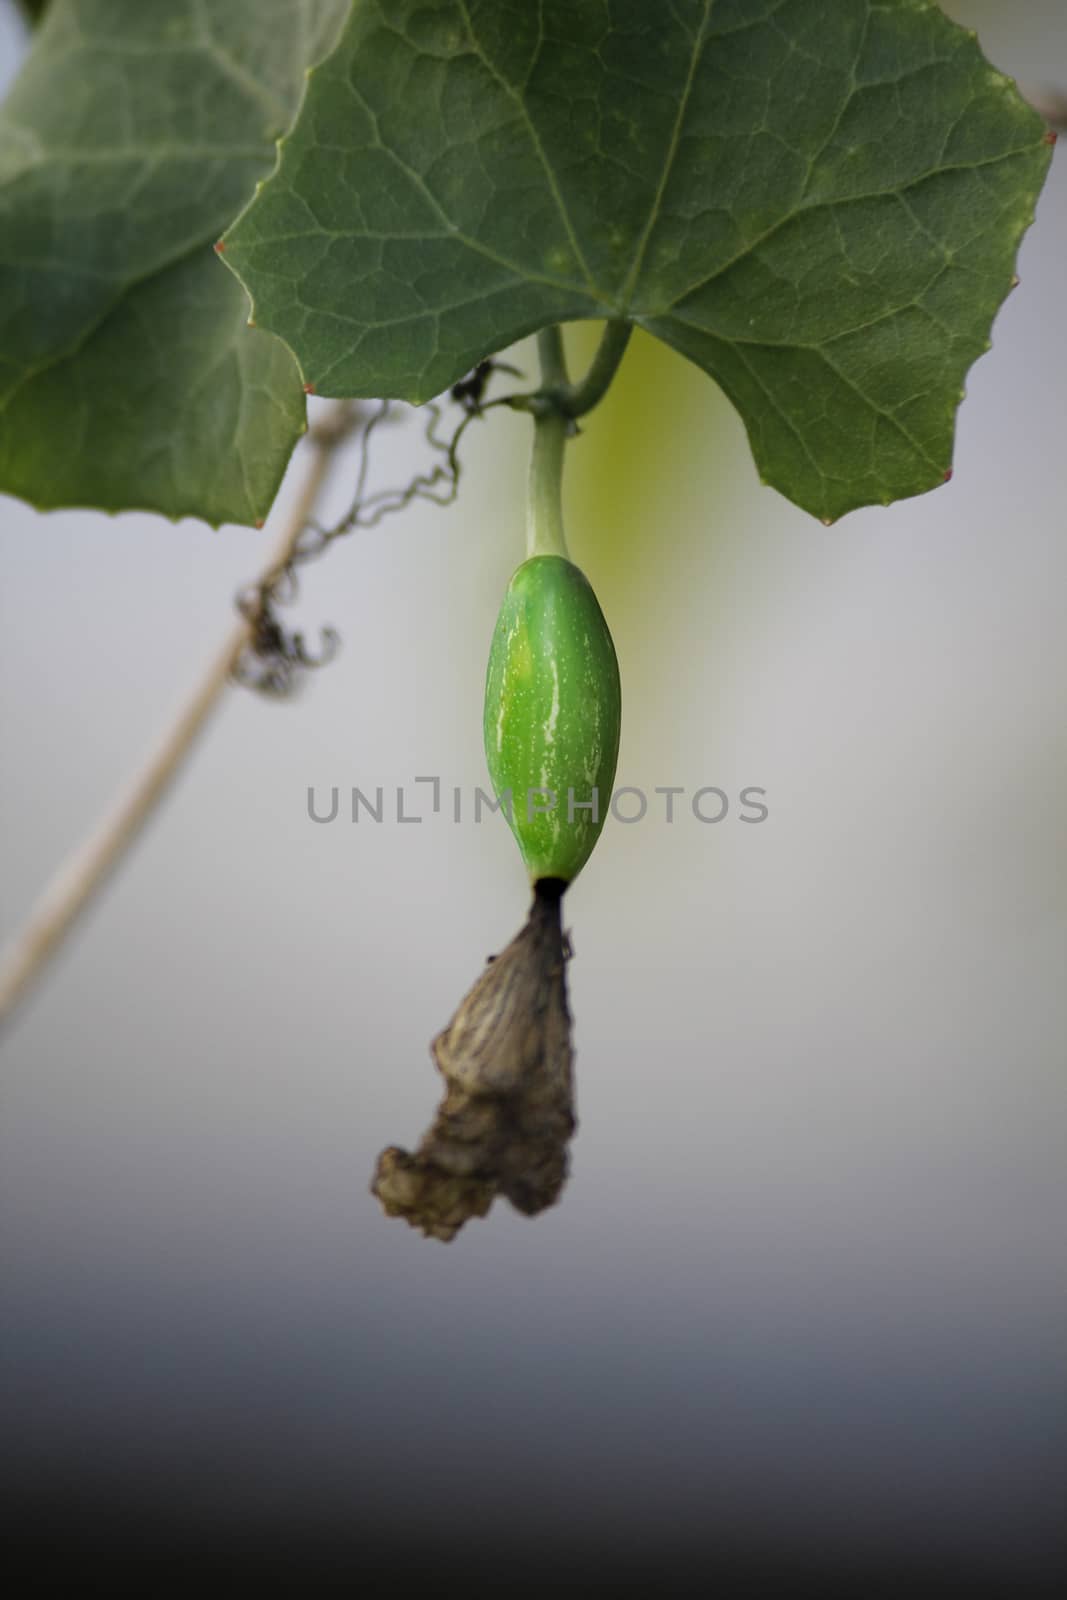 Coccinia grandis, the ivy gourd, also known as baby watermelon, little gourd, gentleman's toes, tindora or sometimes inaccurately identified as gherkin, is a tropical vine.